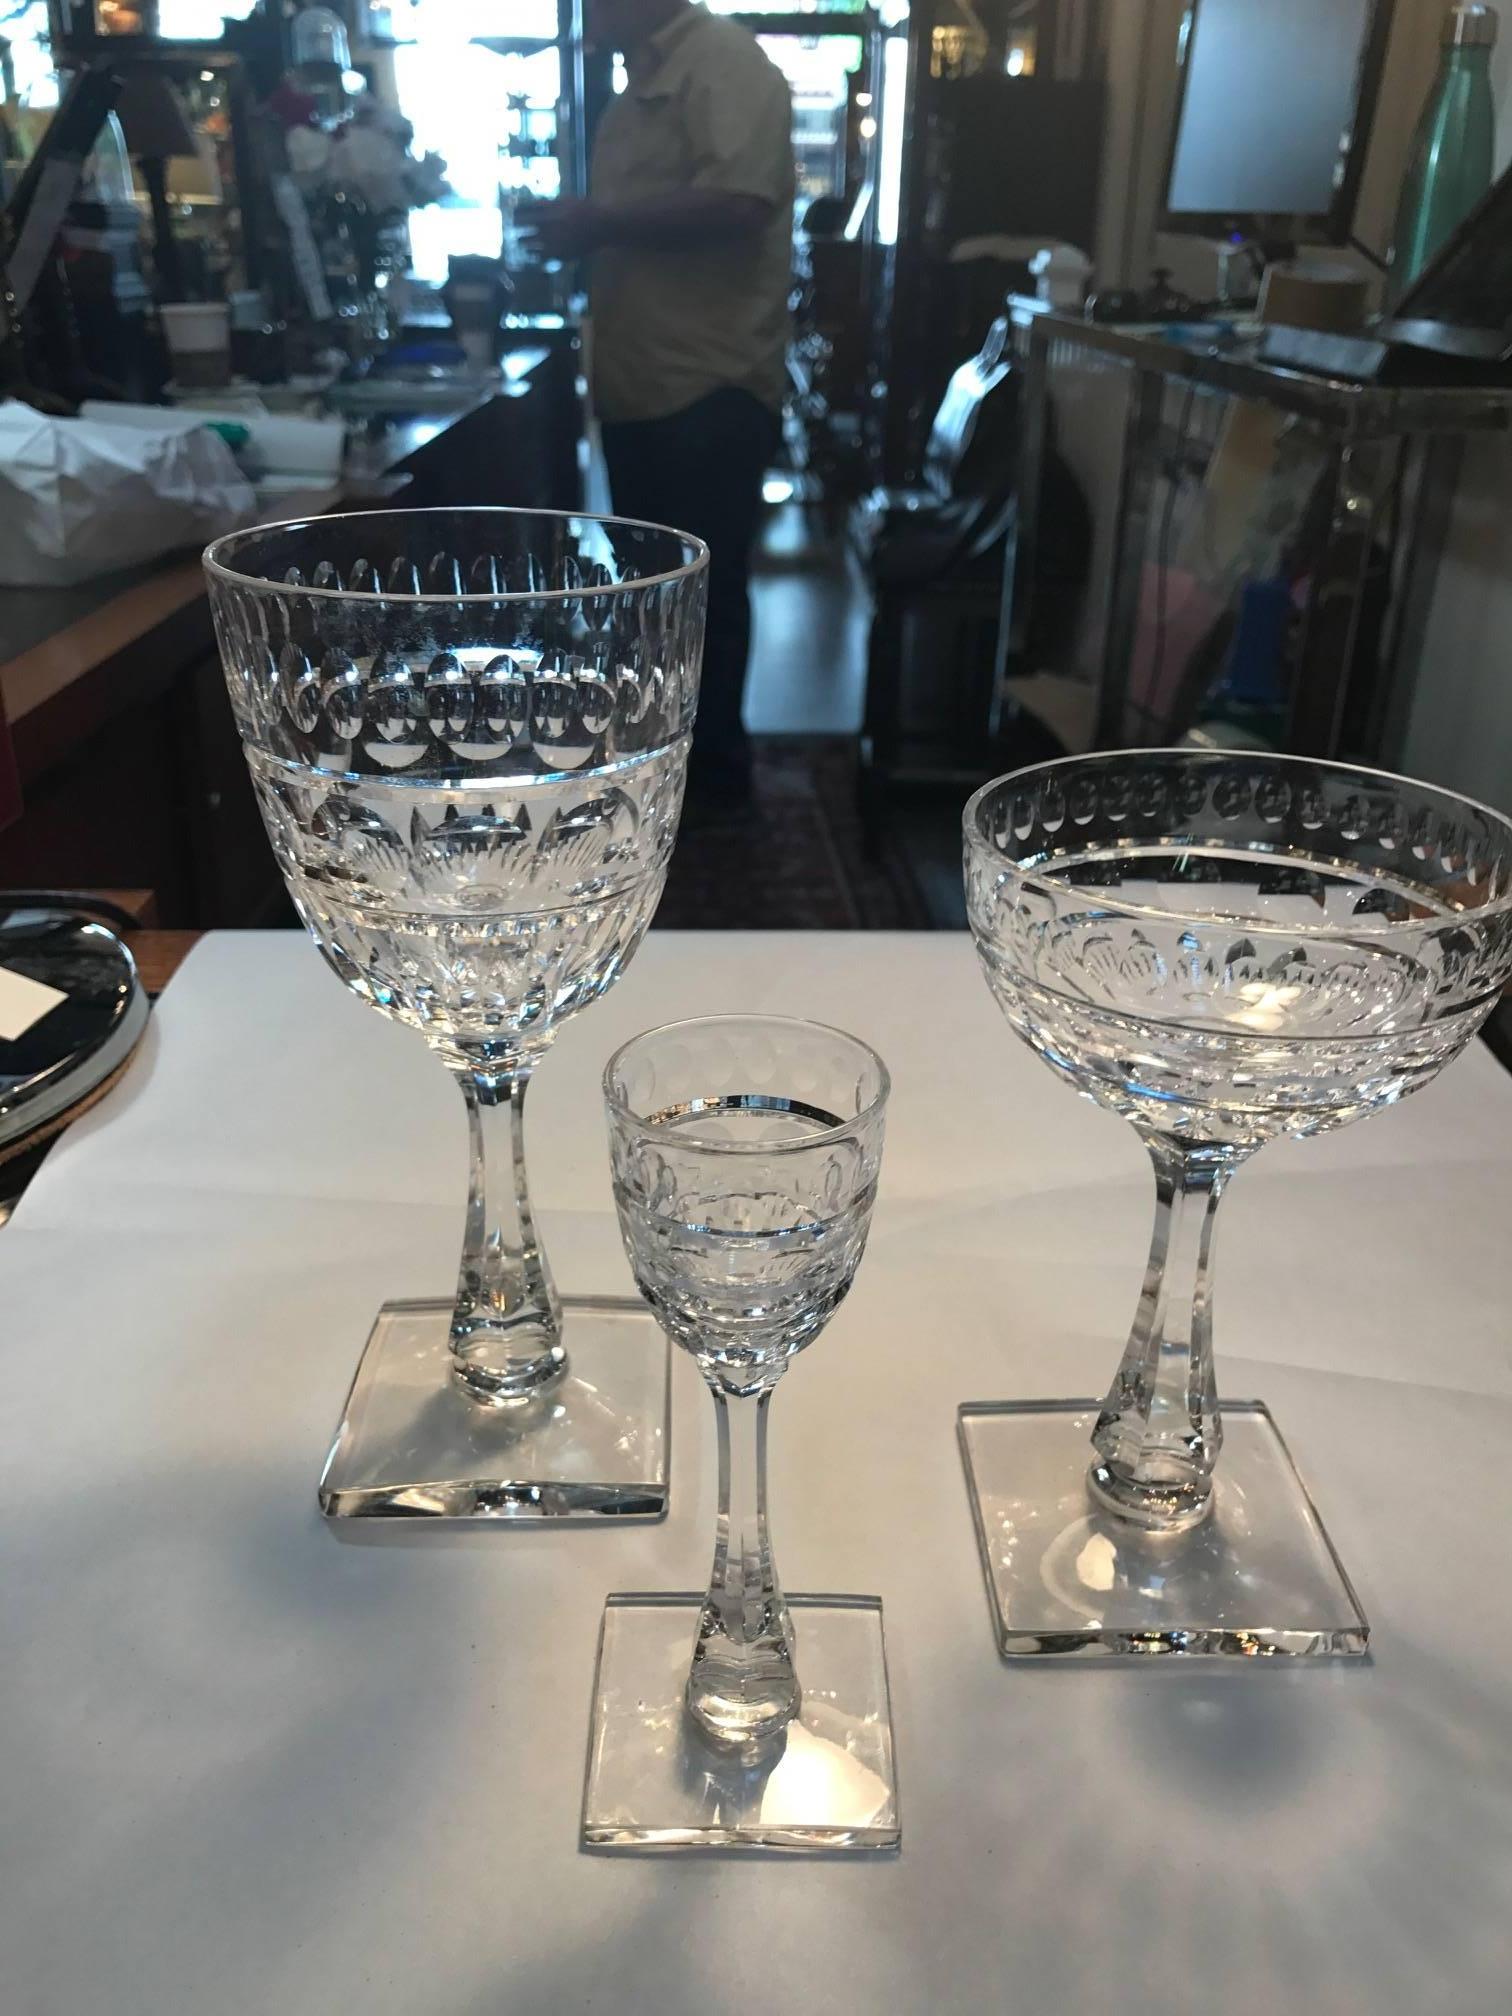 Exceptional and complete set of Hawkes hand cut and polished stemware. 12-7.75 in Wine glasses, 12-6.25 in Coupe Champagnes and 12-5.25 in cordials. All hand made in the early 20th century by the master glass cutters from Hawkes, Corning NY.